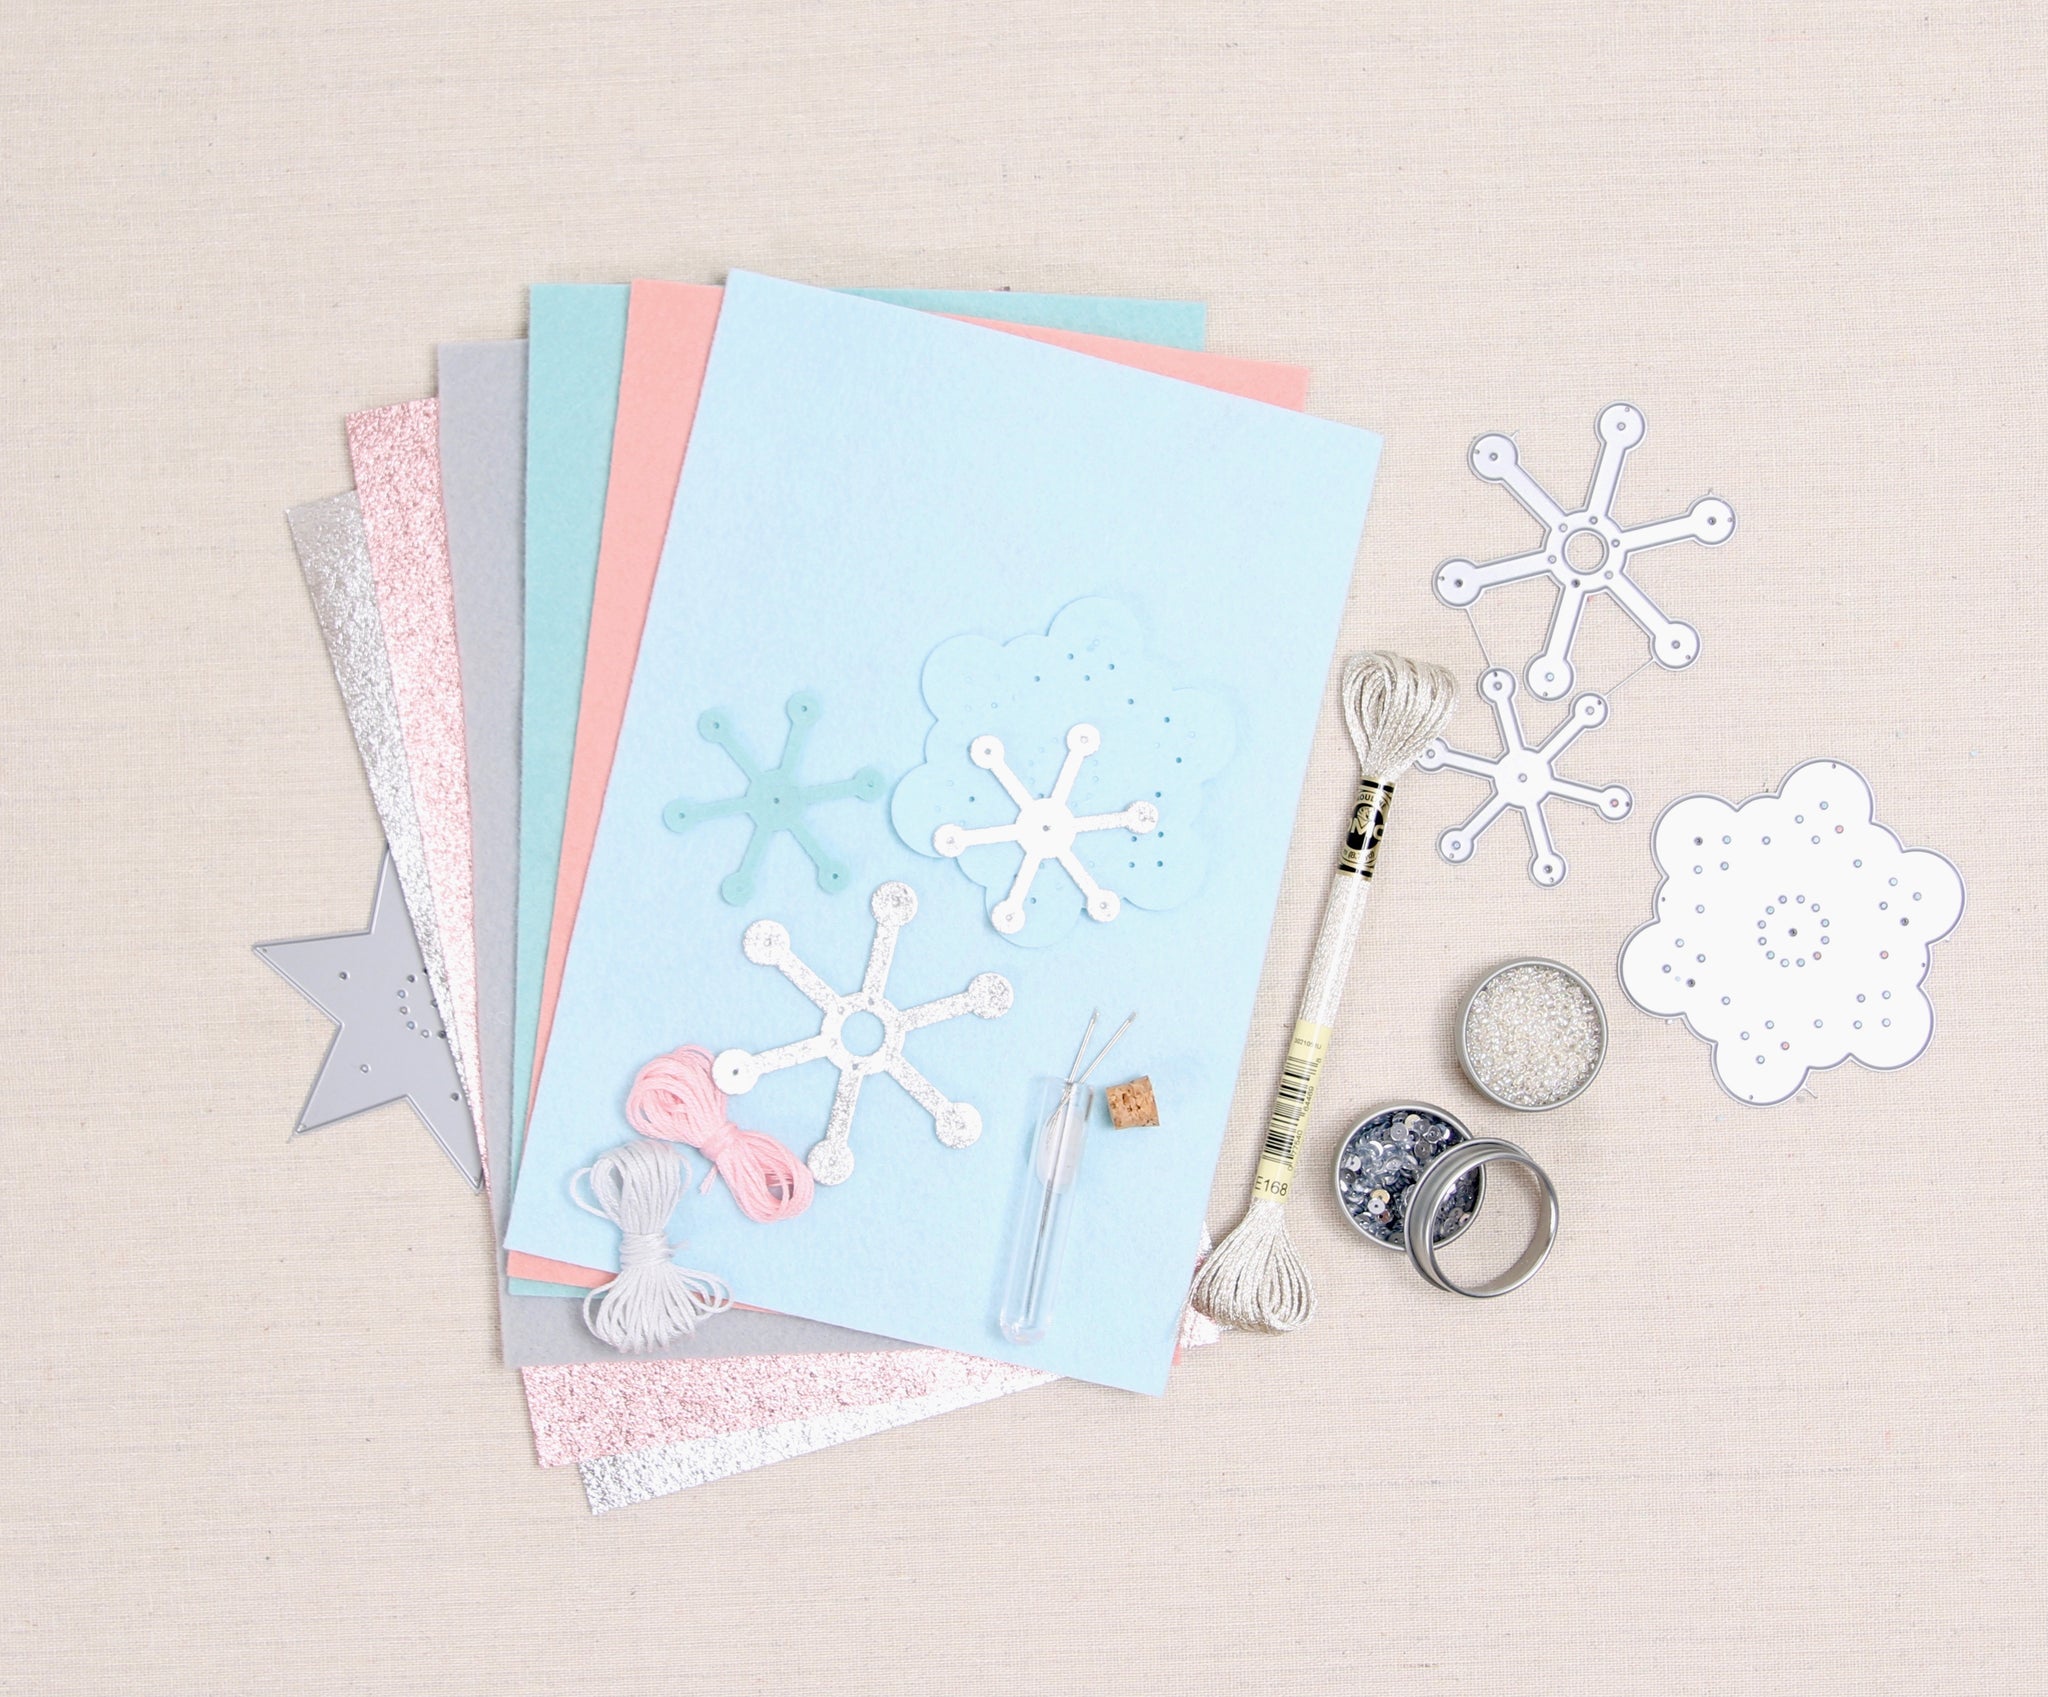 Legend of the Snowflake Ornament Craft Kit